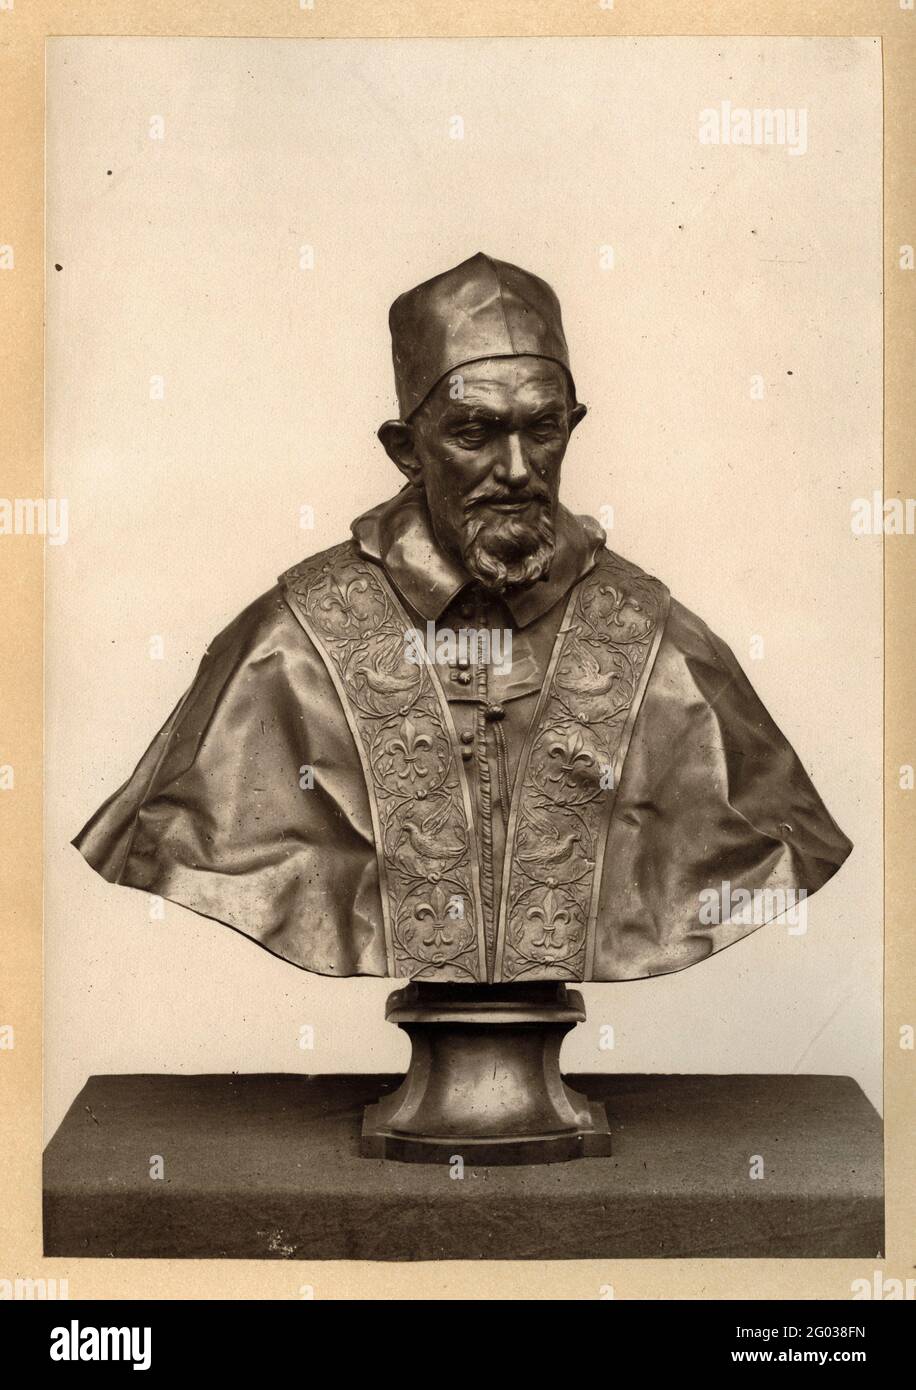 Bronze bust of Pope Innocent X (1574 - 1655) by Domenico Guidi (1625 - 1701), circa 1690 (cast) after a terracotta model by Alessandro Algardi (1598 - 1654), 1650, located in the South Kensington Museum (later known as the Victoria and Albert Museum), London, England, 1876. Photography attributed to Isabel Agnes Cowper (1826 - 1911), 1876. Stock Photo